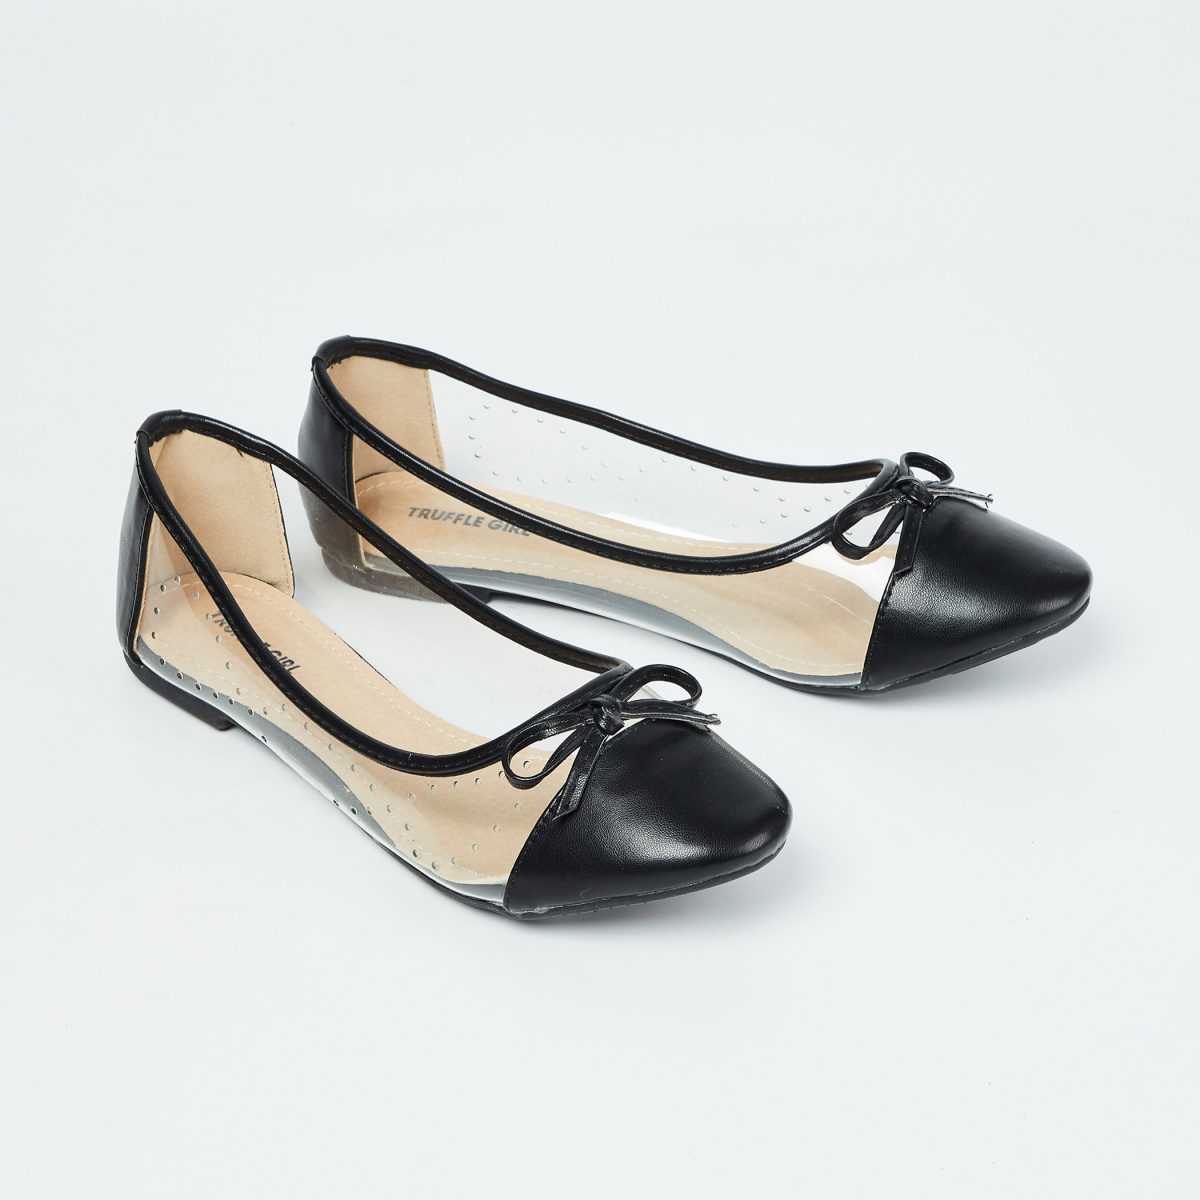 TRUFFLE COLLECTION Panelled Ballerinas with Bow Applique